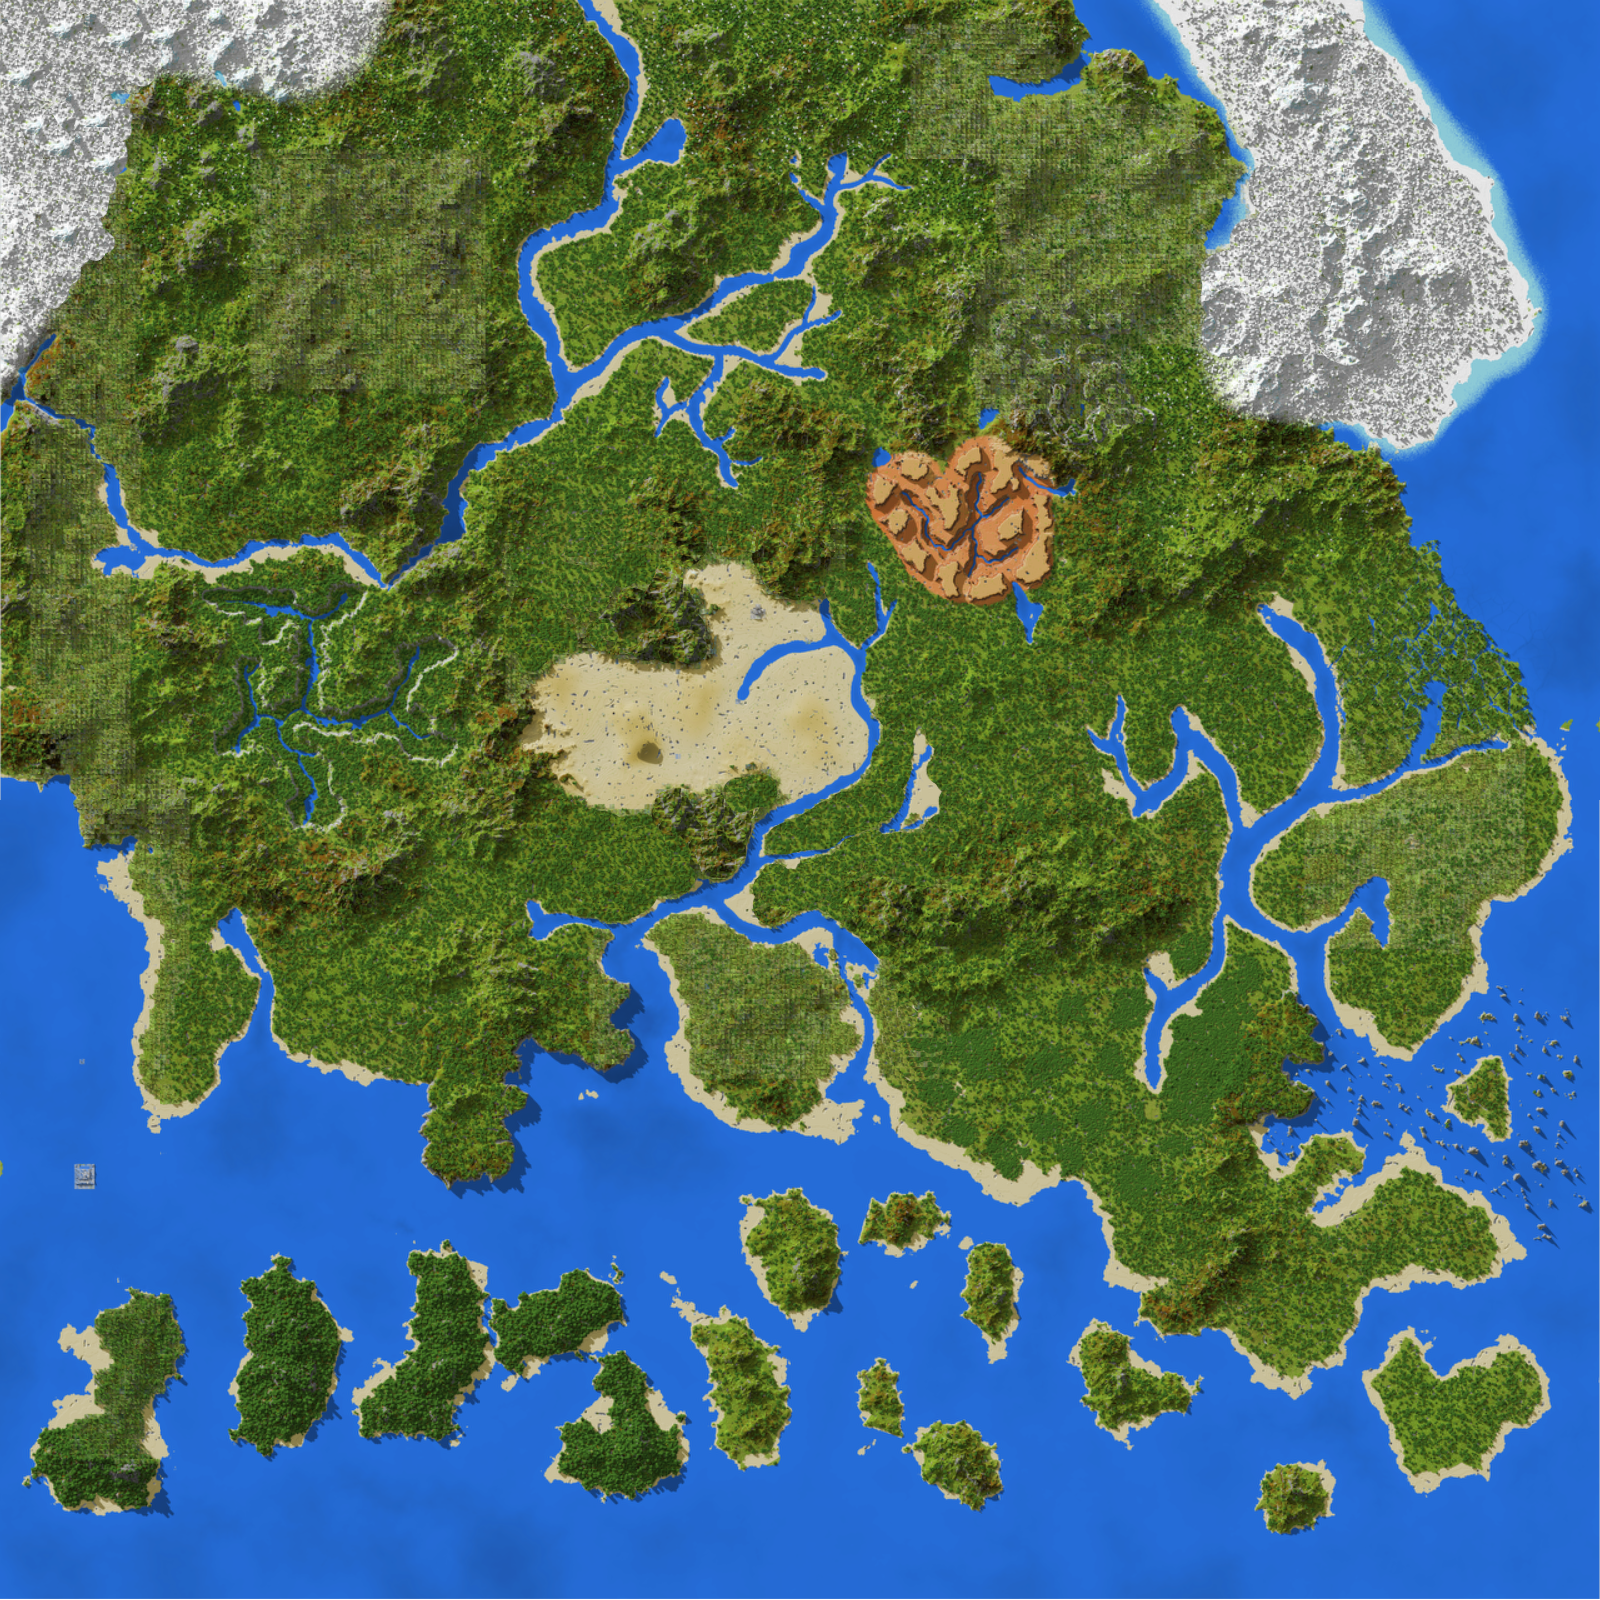 the Earth - Minecraft Worlds - CurseForge